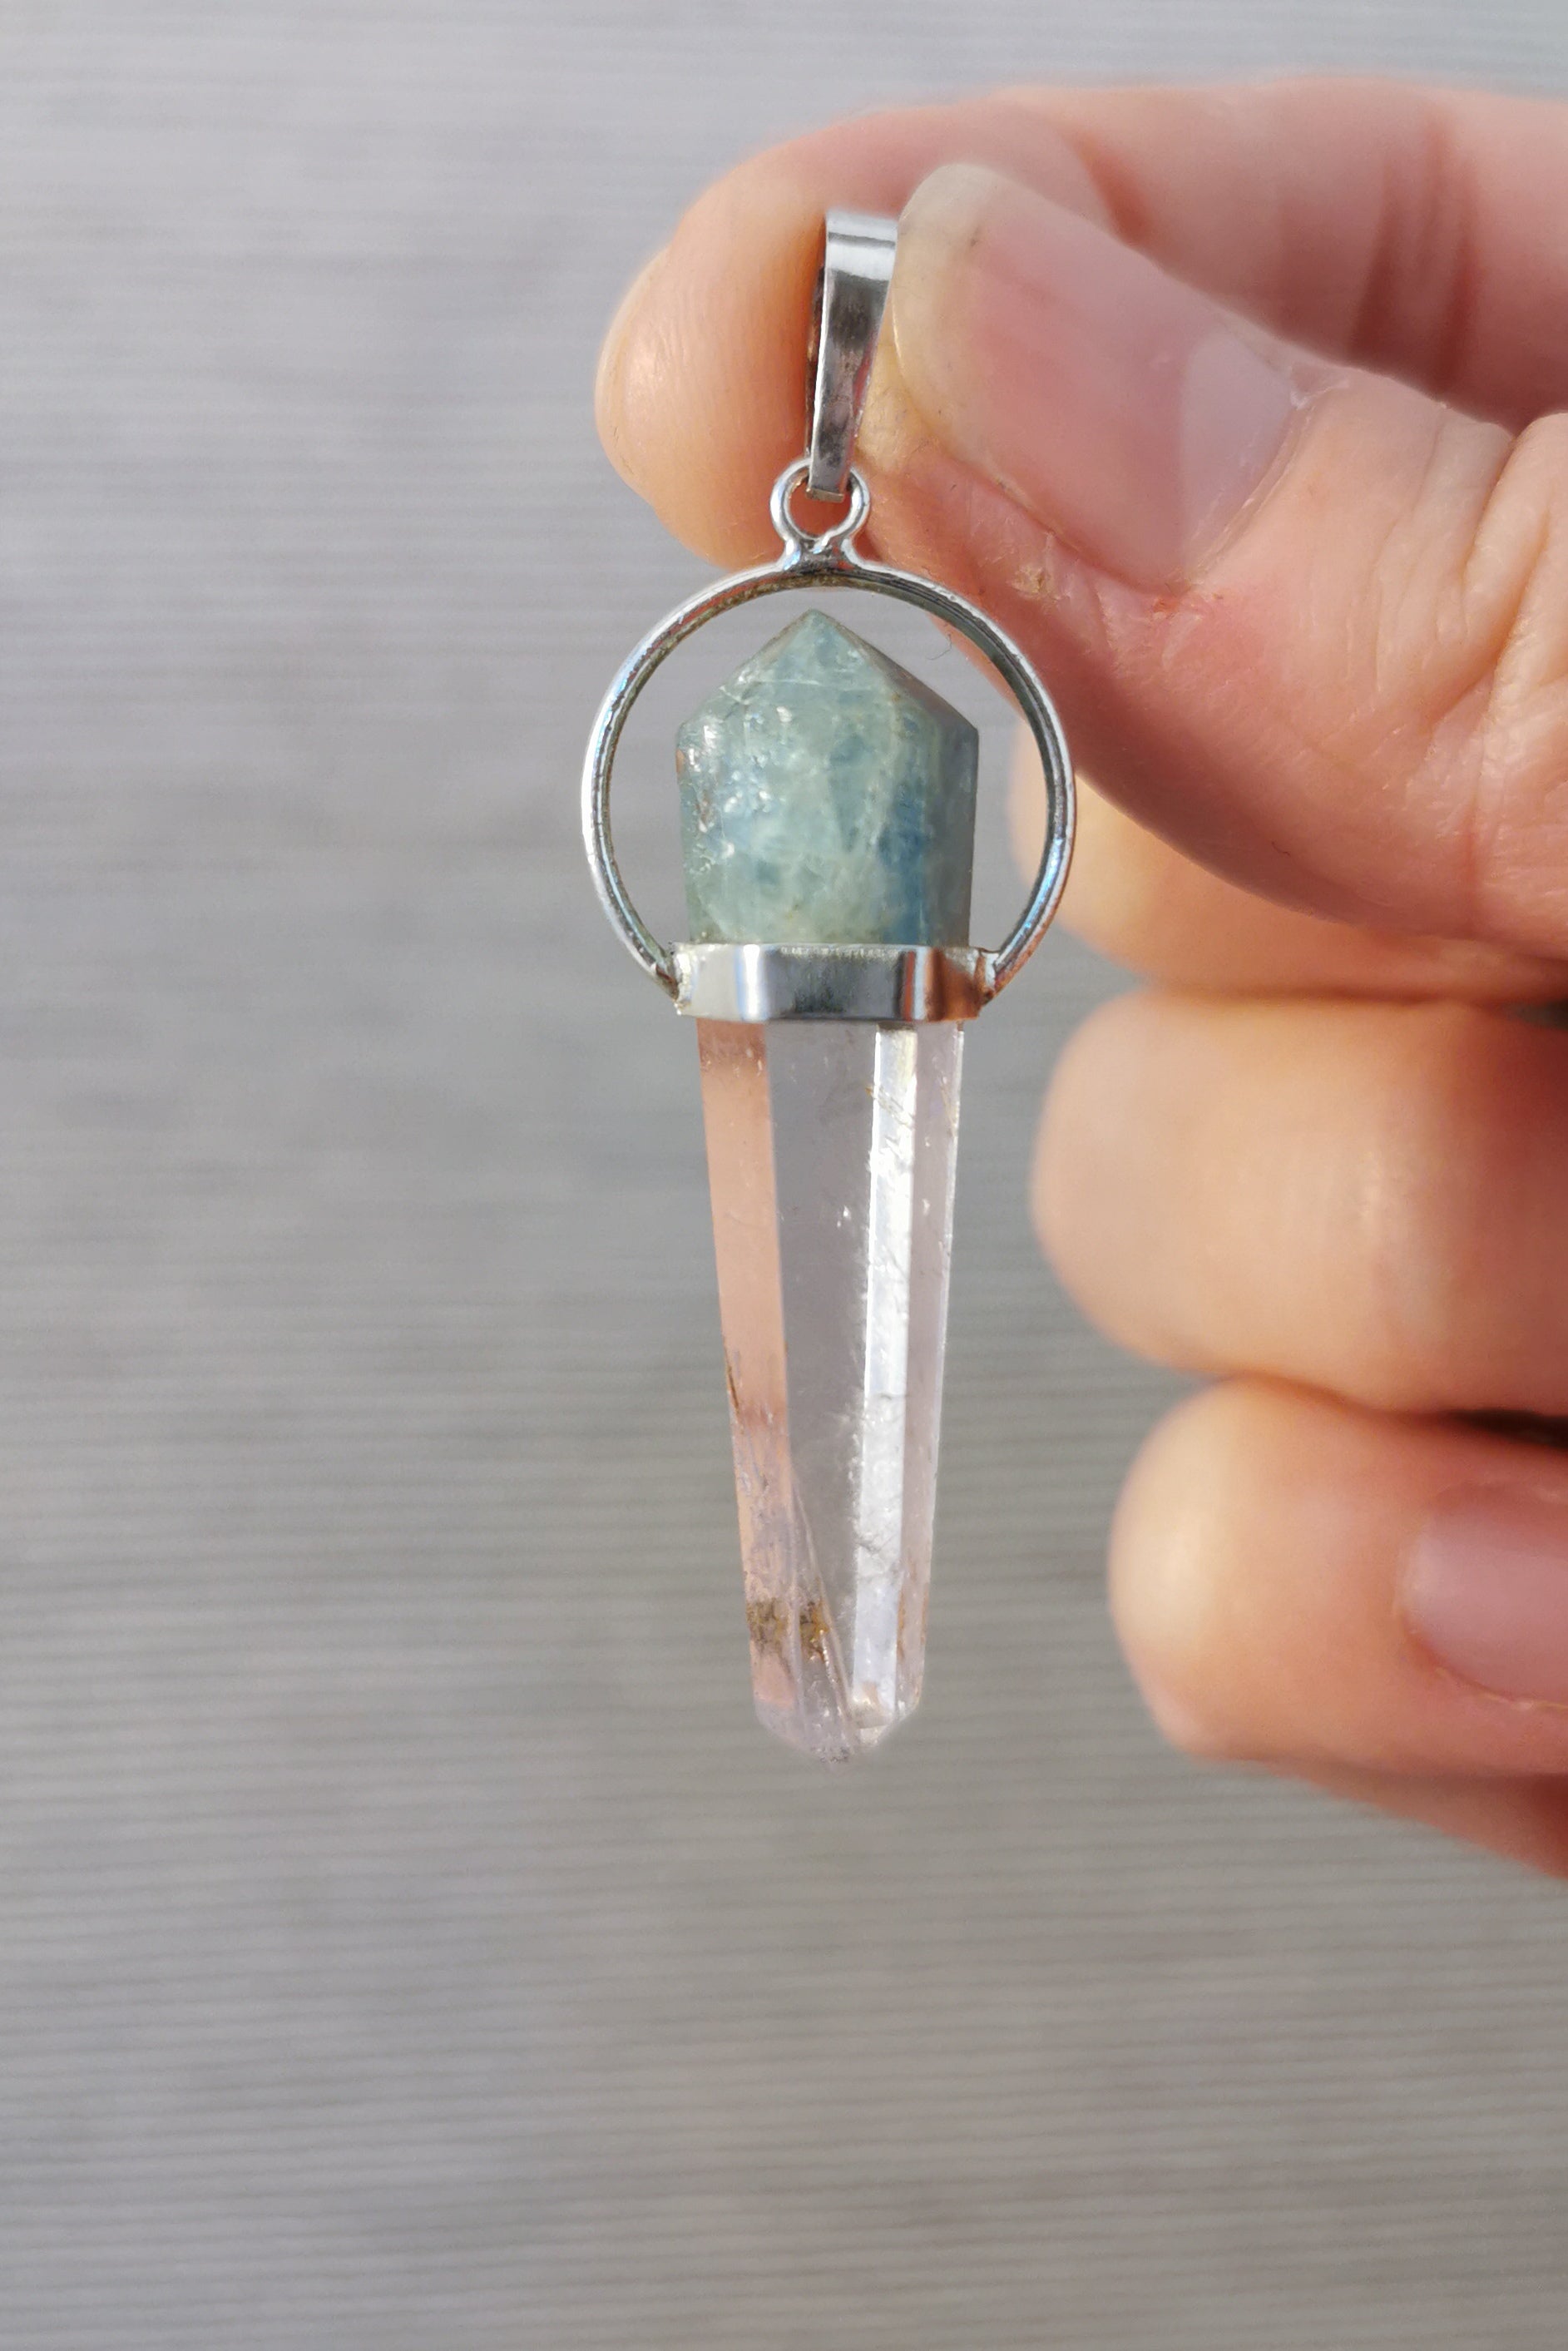 Amethyst and Aquamarine Double Terminated Point Pendant - 4 cm - 925 Sterling Silver